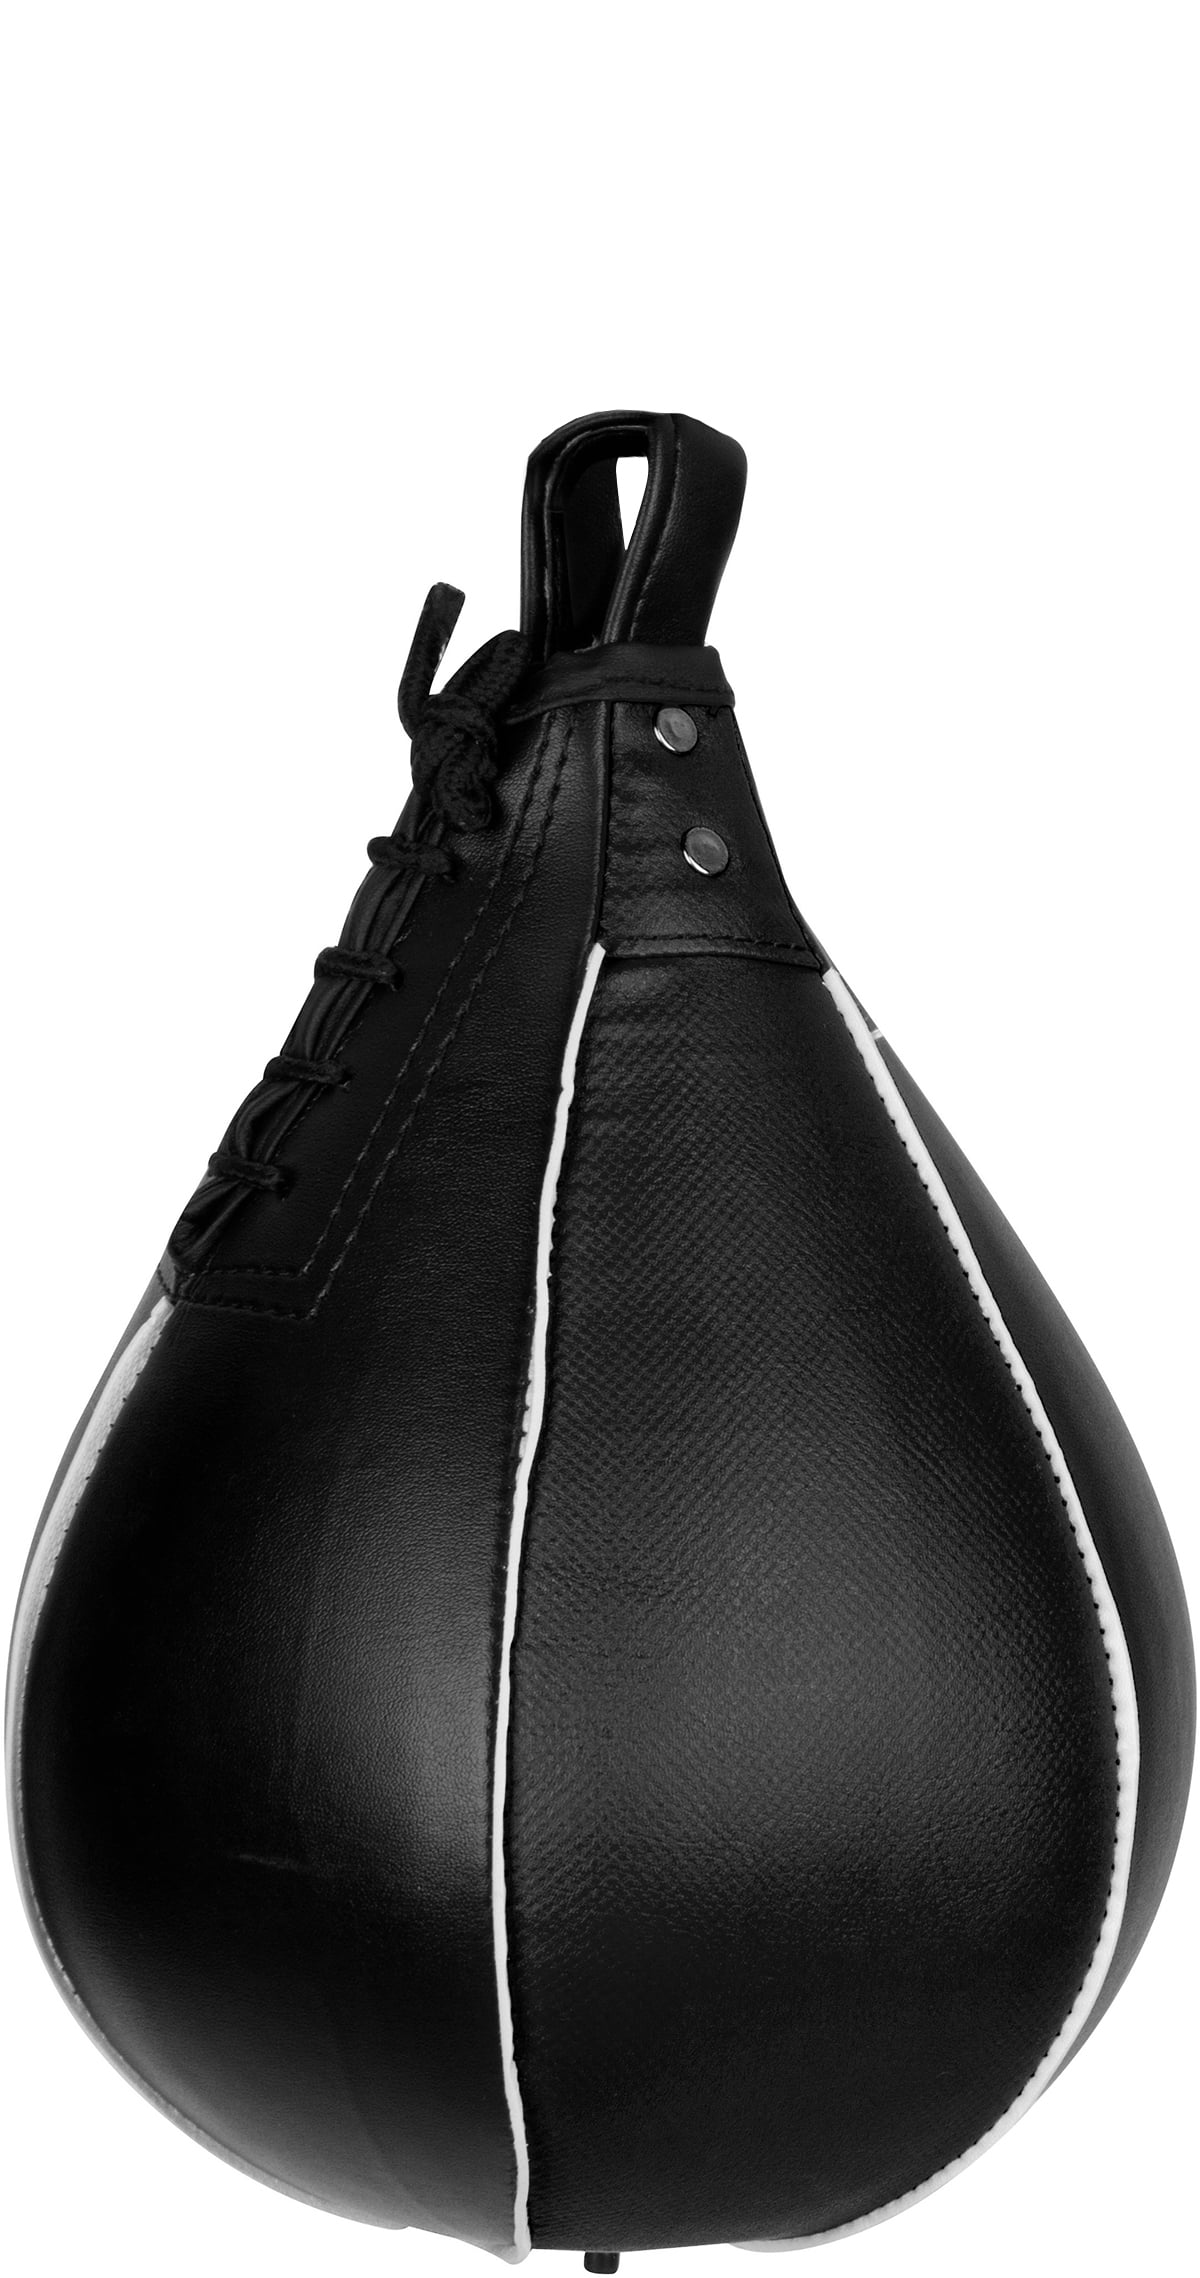 Boxing Speed Bag For Workout Training by Trademark Innovations - www.semadata.org